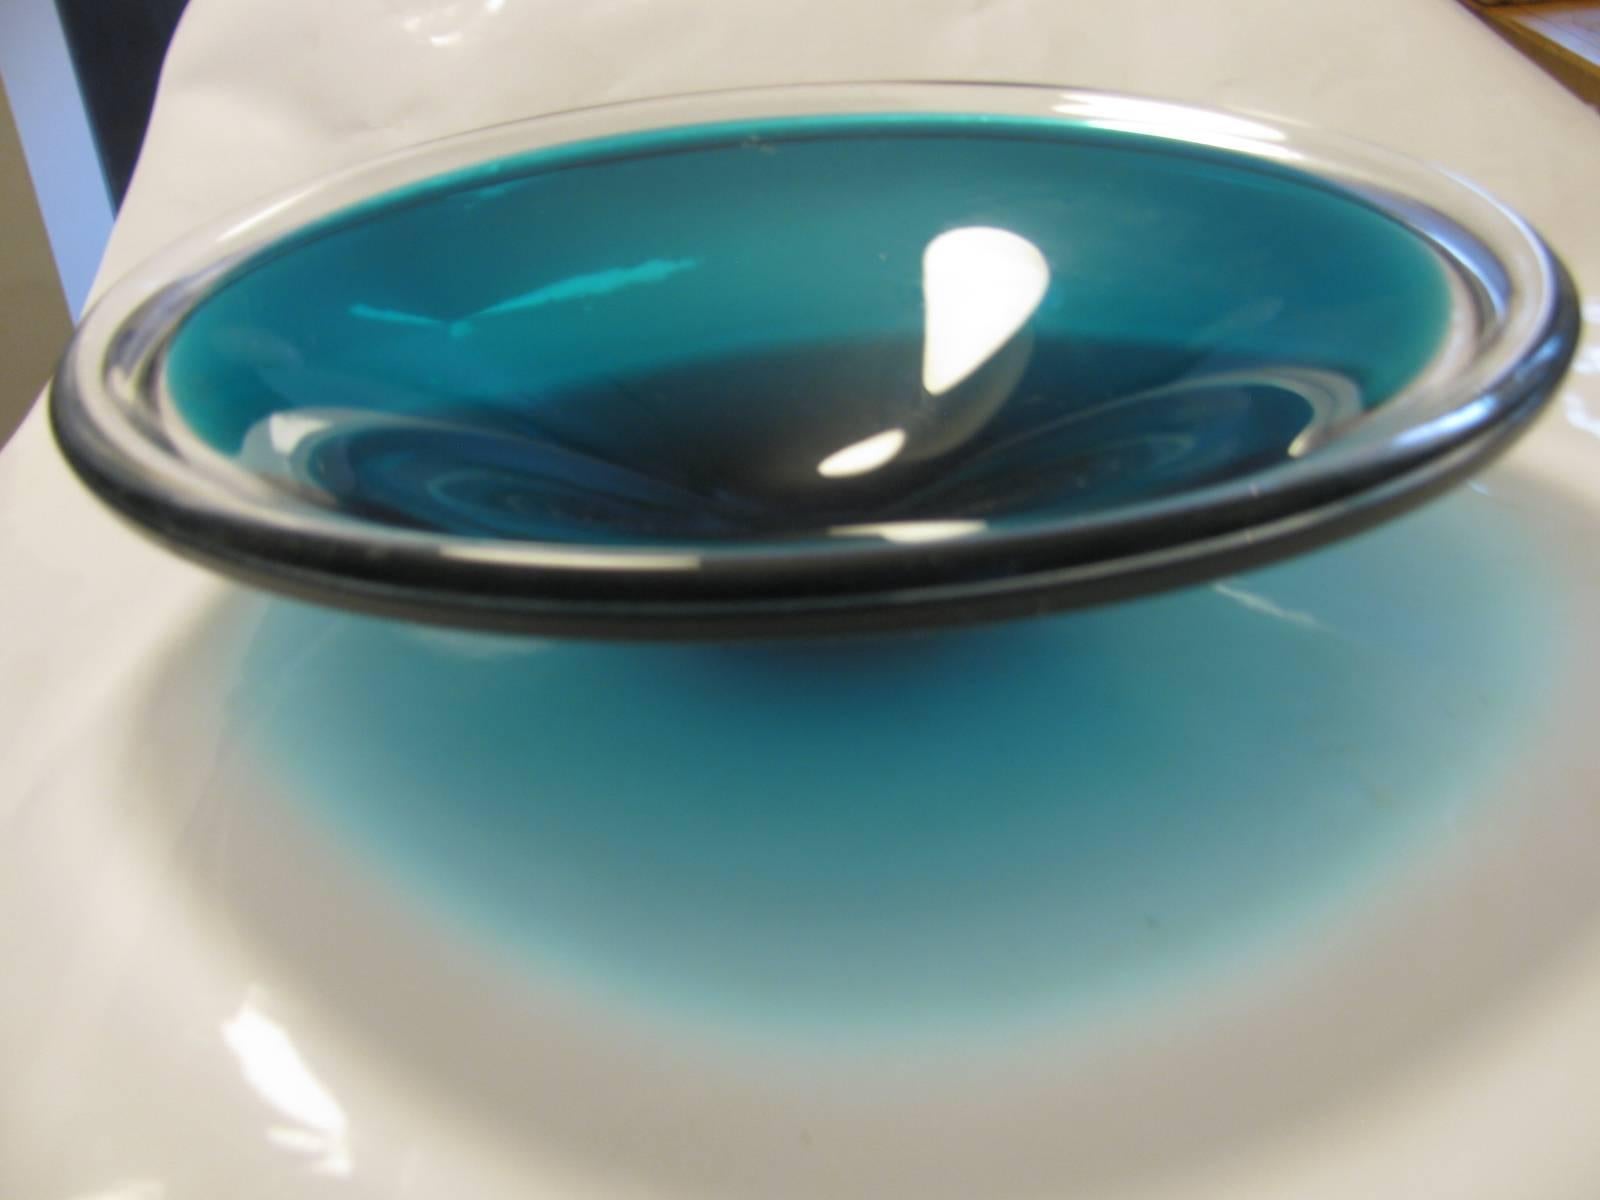 Round bowl , deep dish with cased glass, clear to sea blue. In excellent vintage condition with some wear to the underside of the base, as expected. Great Color, very serene.